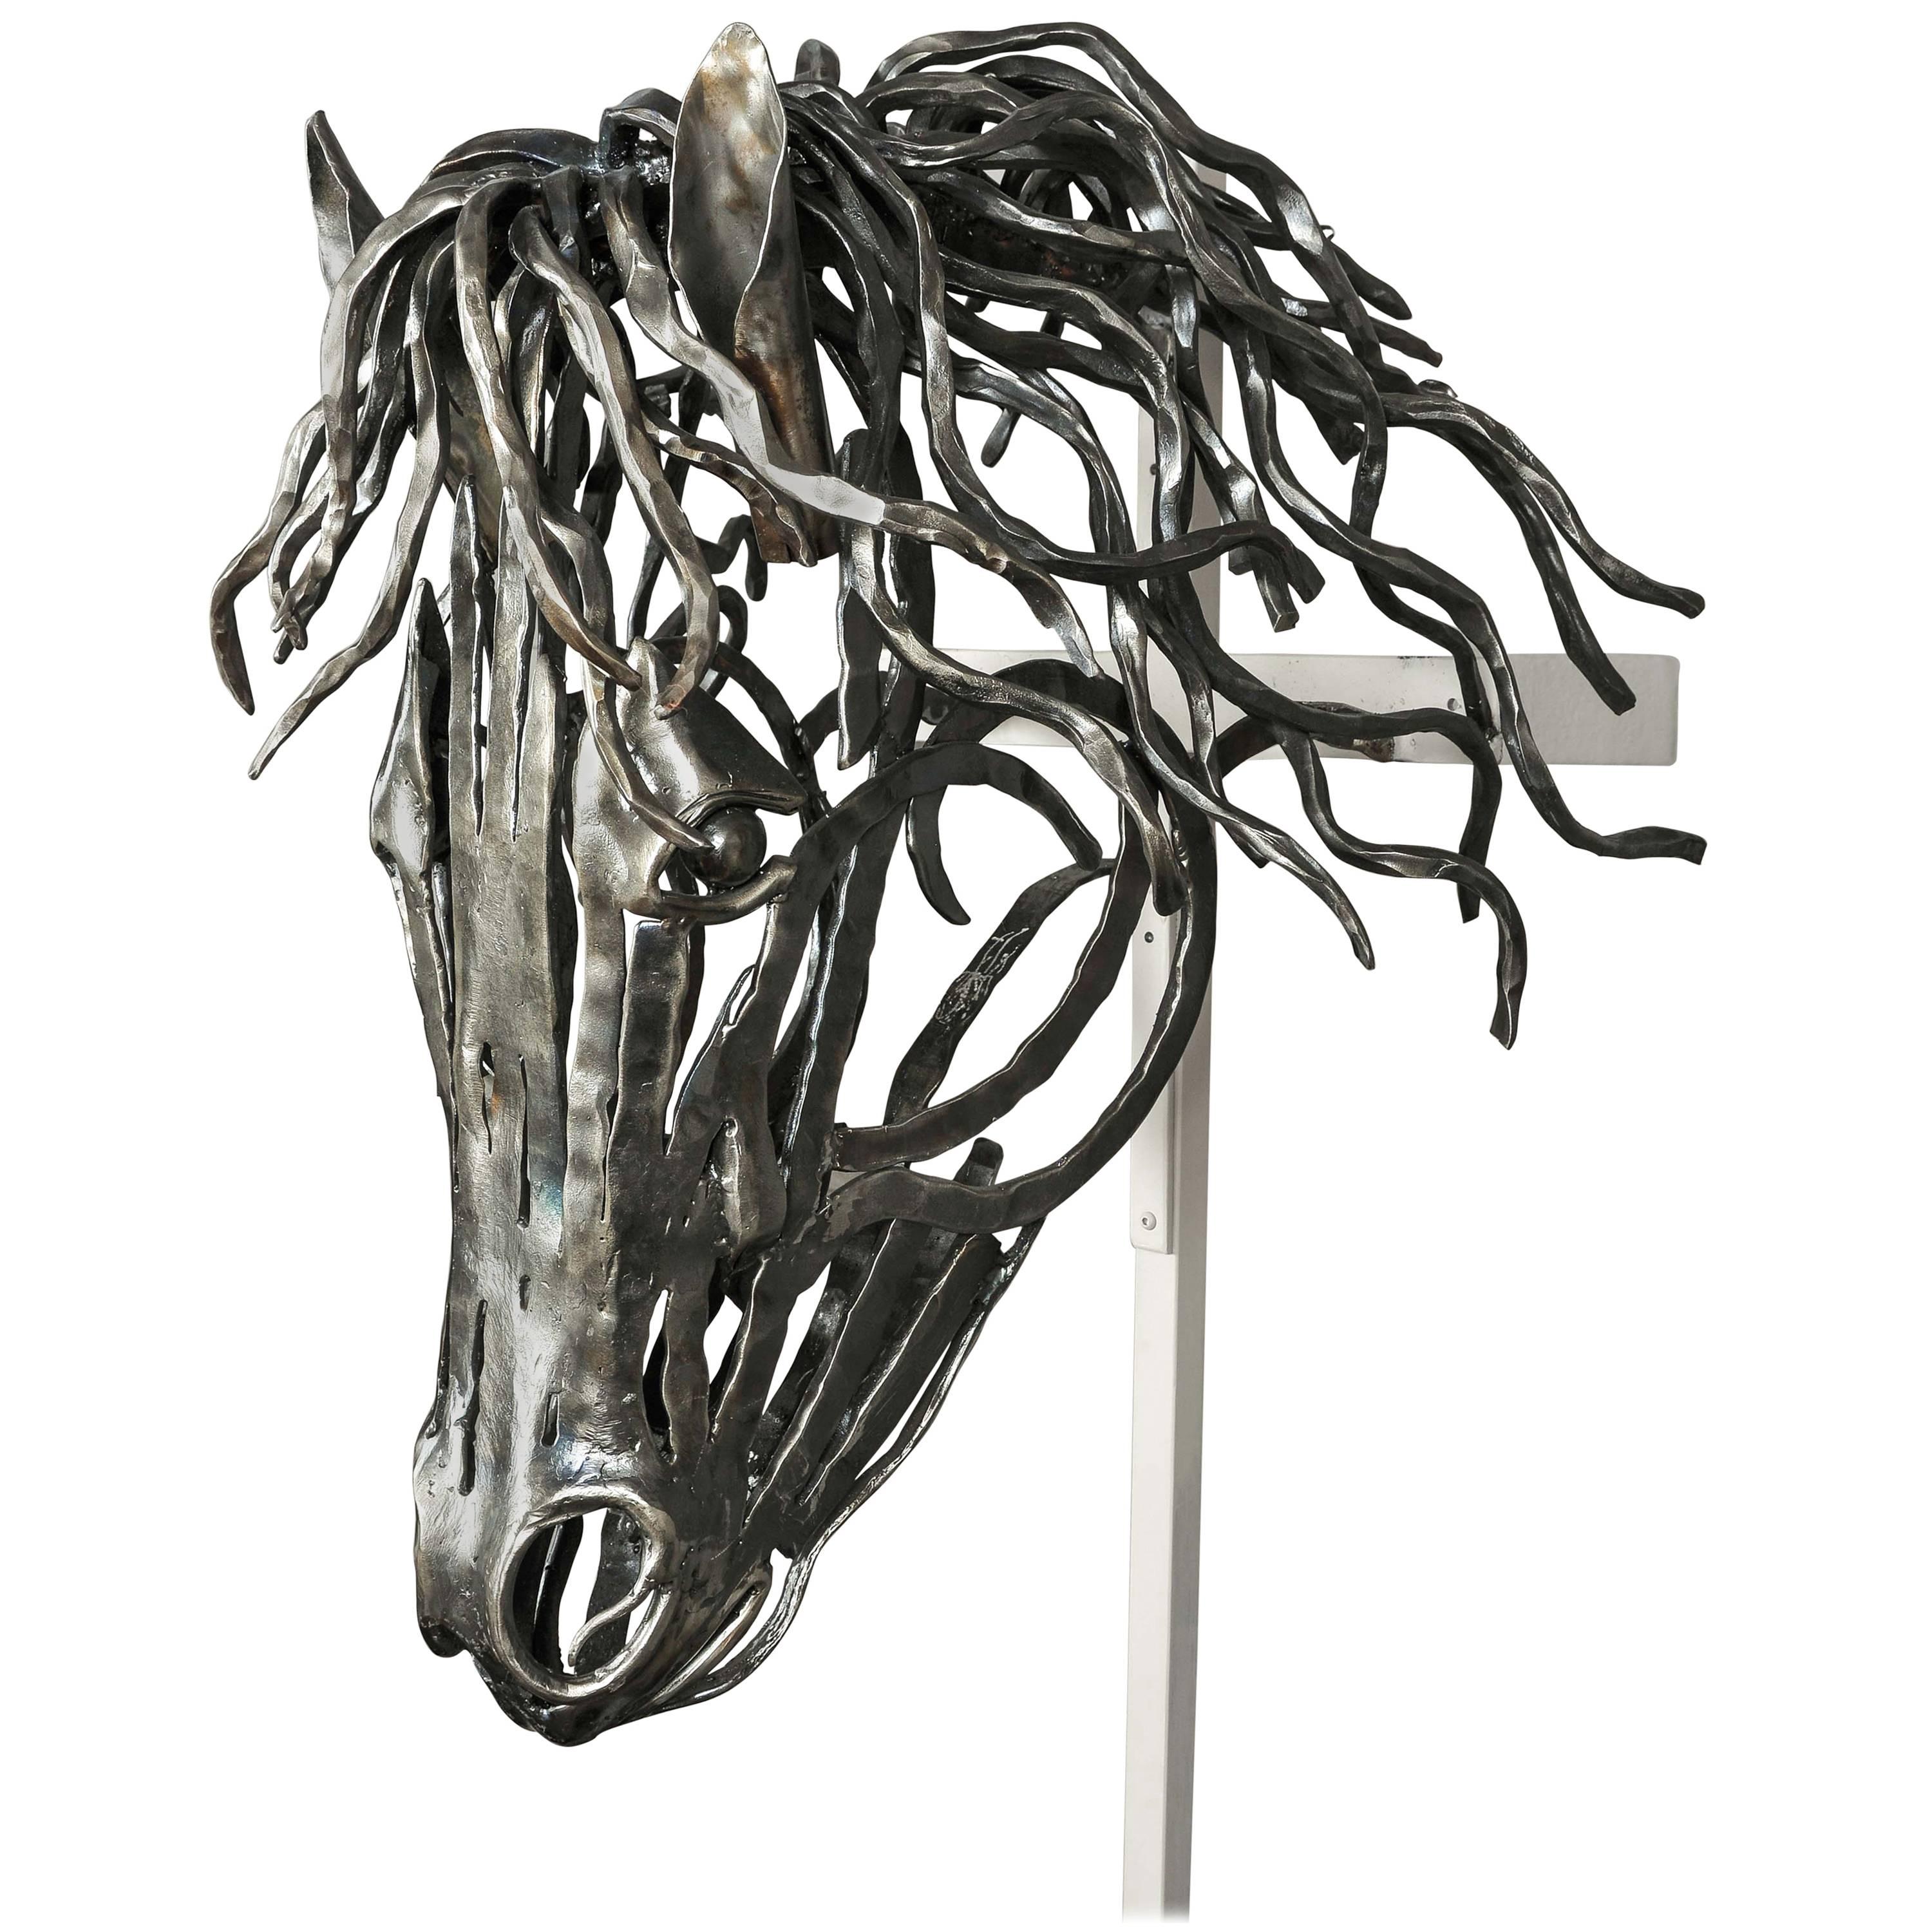 Unique Hand-Forged Model of a Horse's Head in Textured Bar Steel For Sale